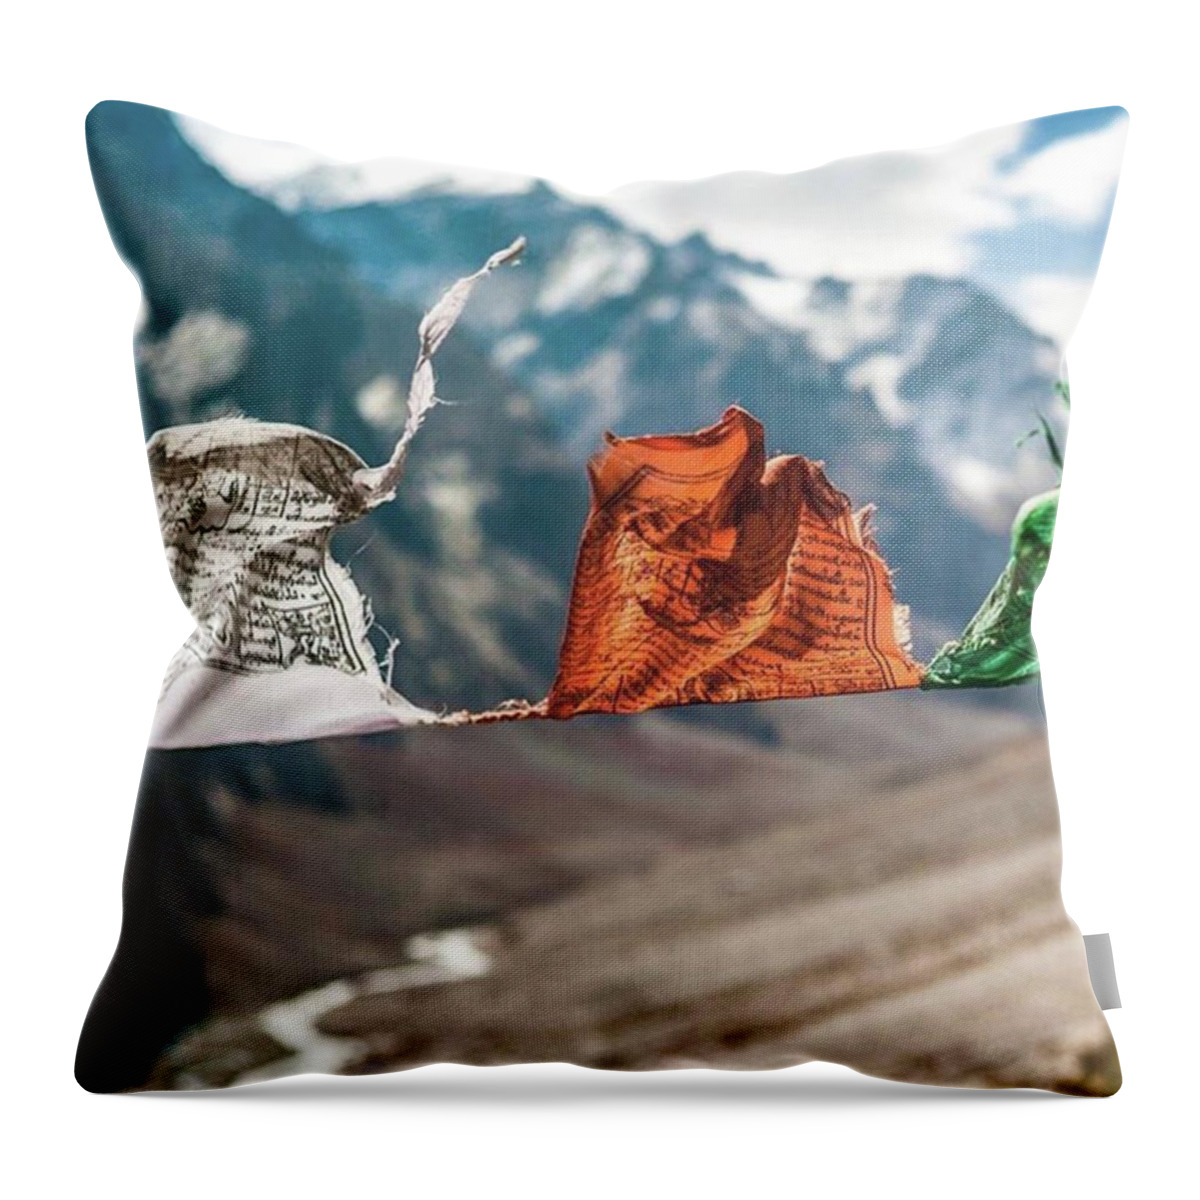  Throw Pillow featuring the photograph Tibetan Flags Blowing In The Wind by Aleck Cartwright